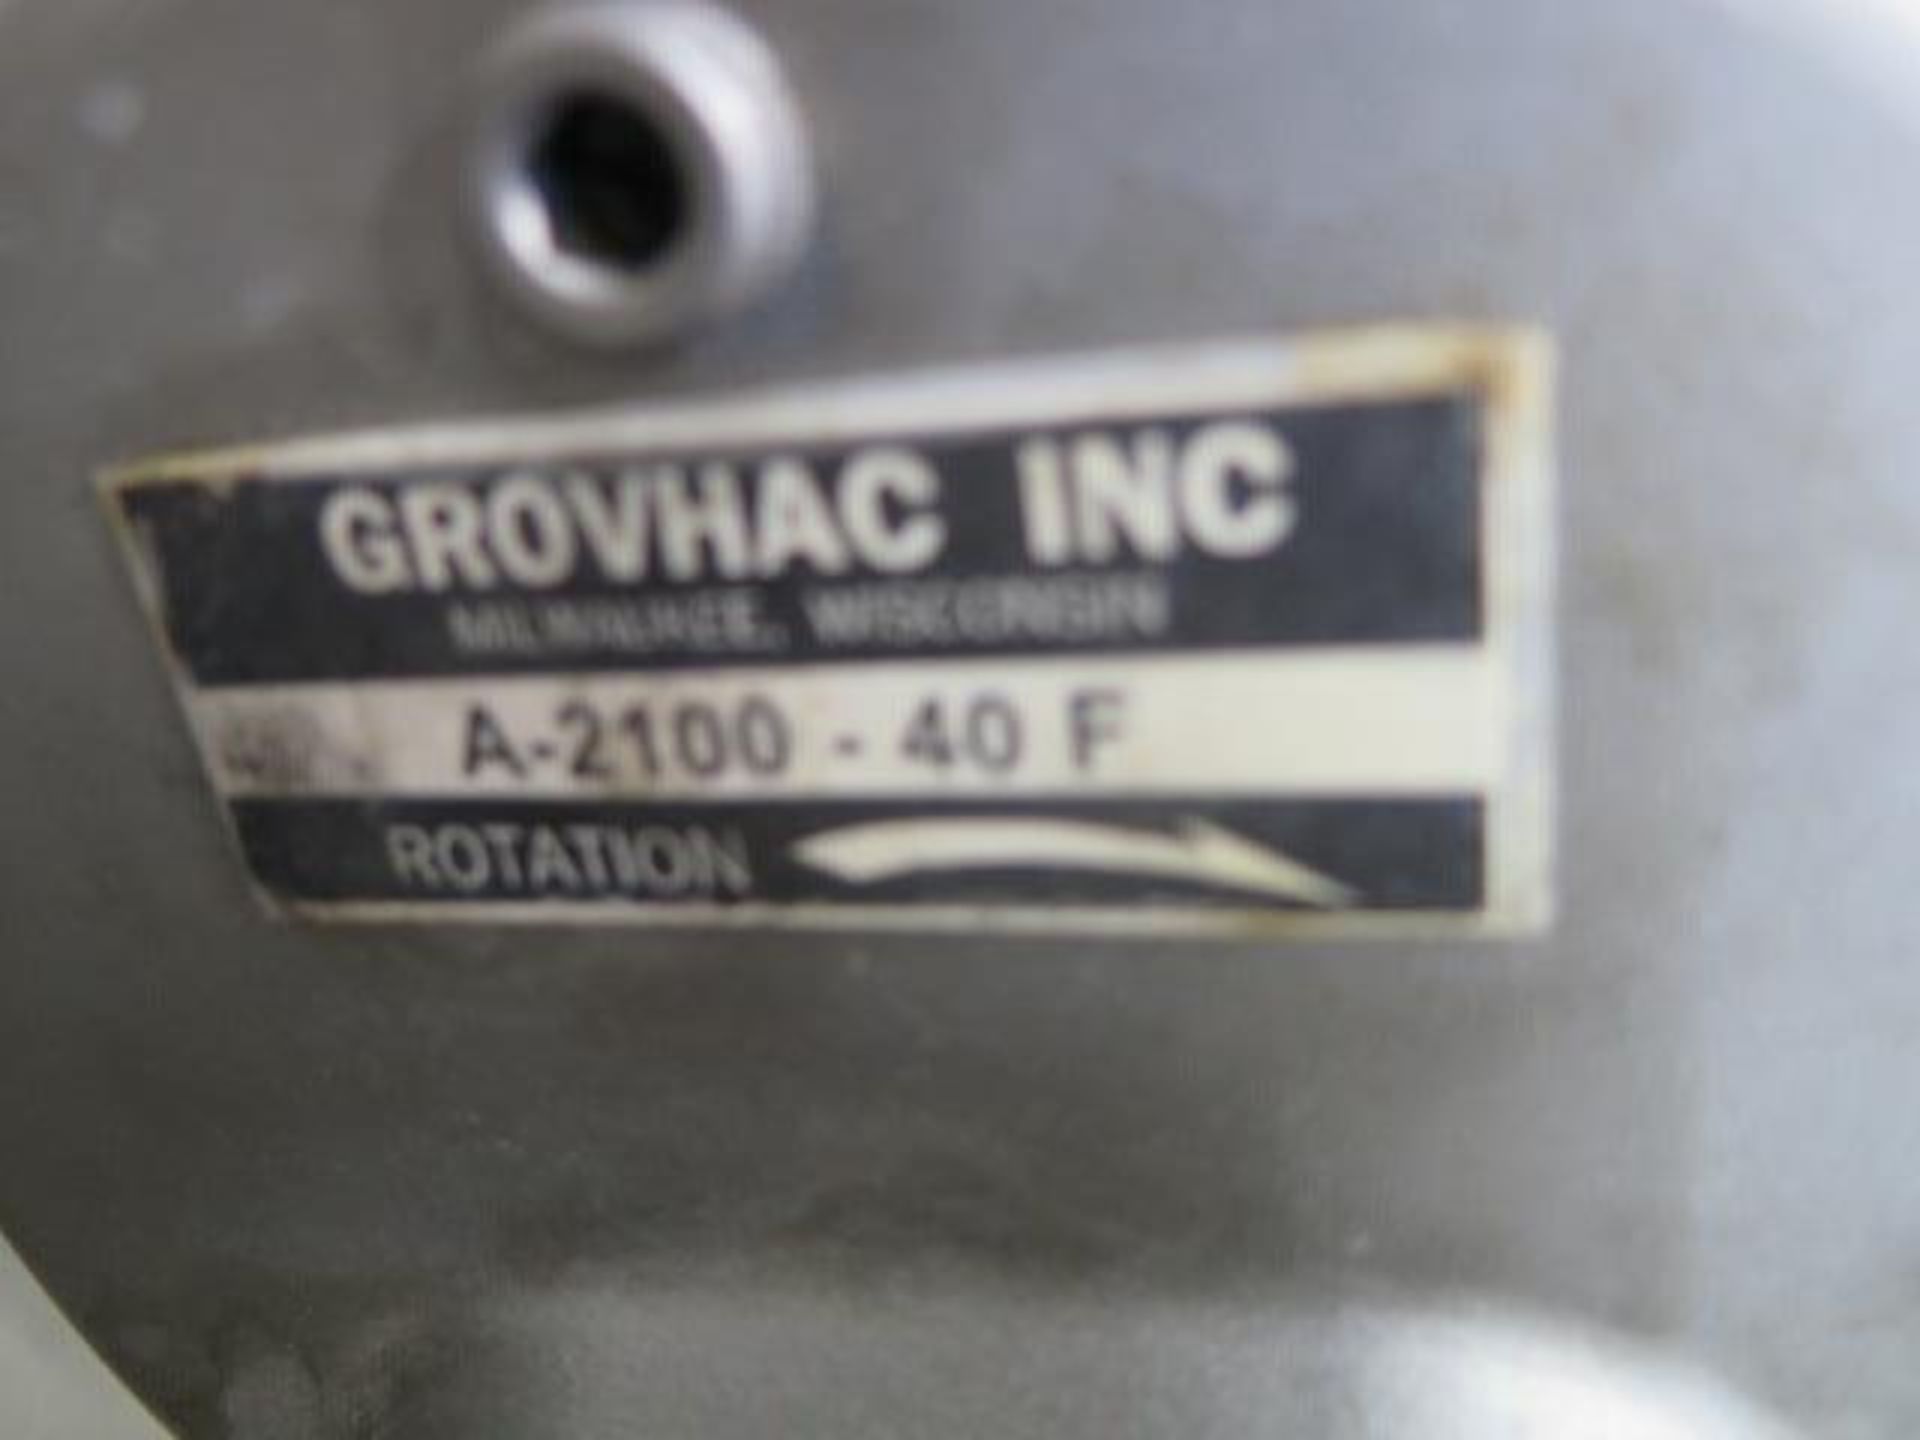 Grovhac A-2100-40F Pneumatic Mixer w/ Tank (SOLD AS-IS - NO WARRANTY) - Image 6 of 6